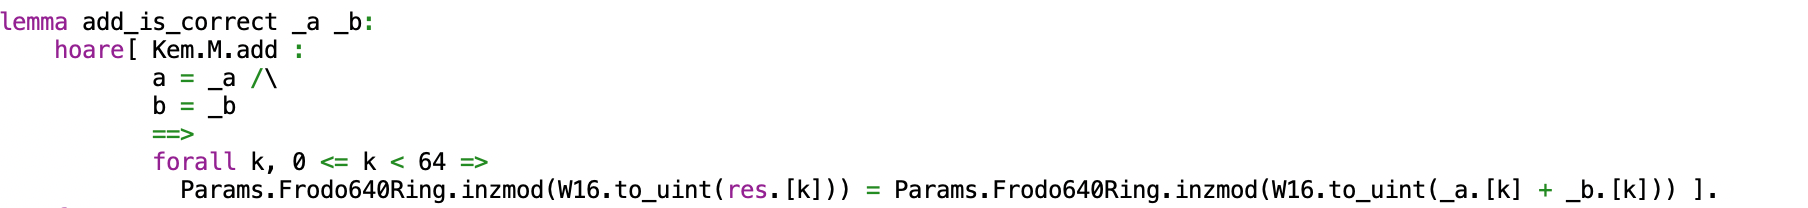 Code showing the theorem addition function as extracted to EasyCrypt.